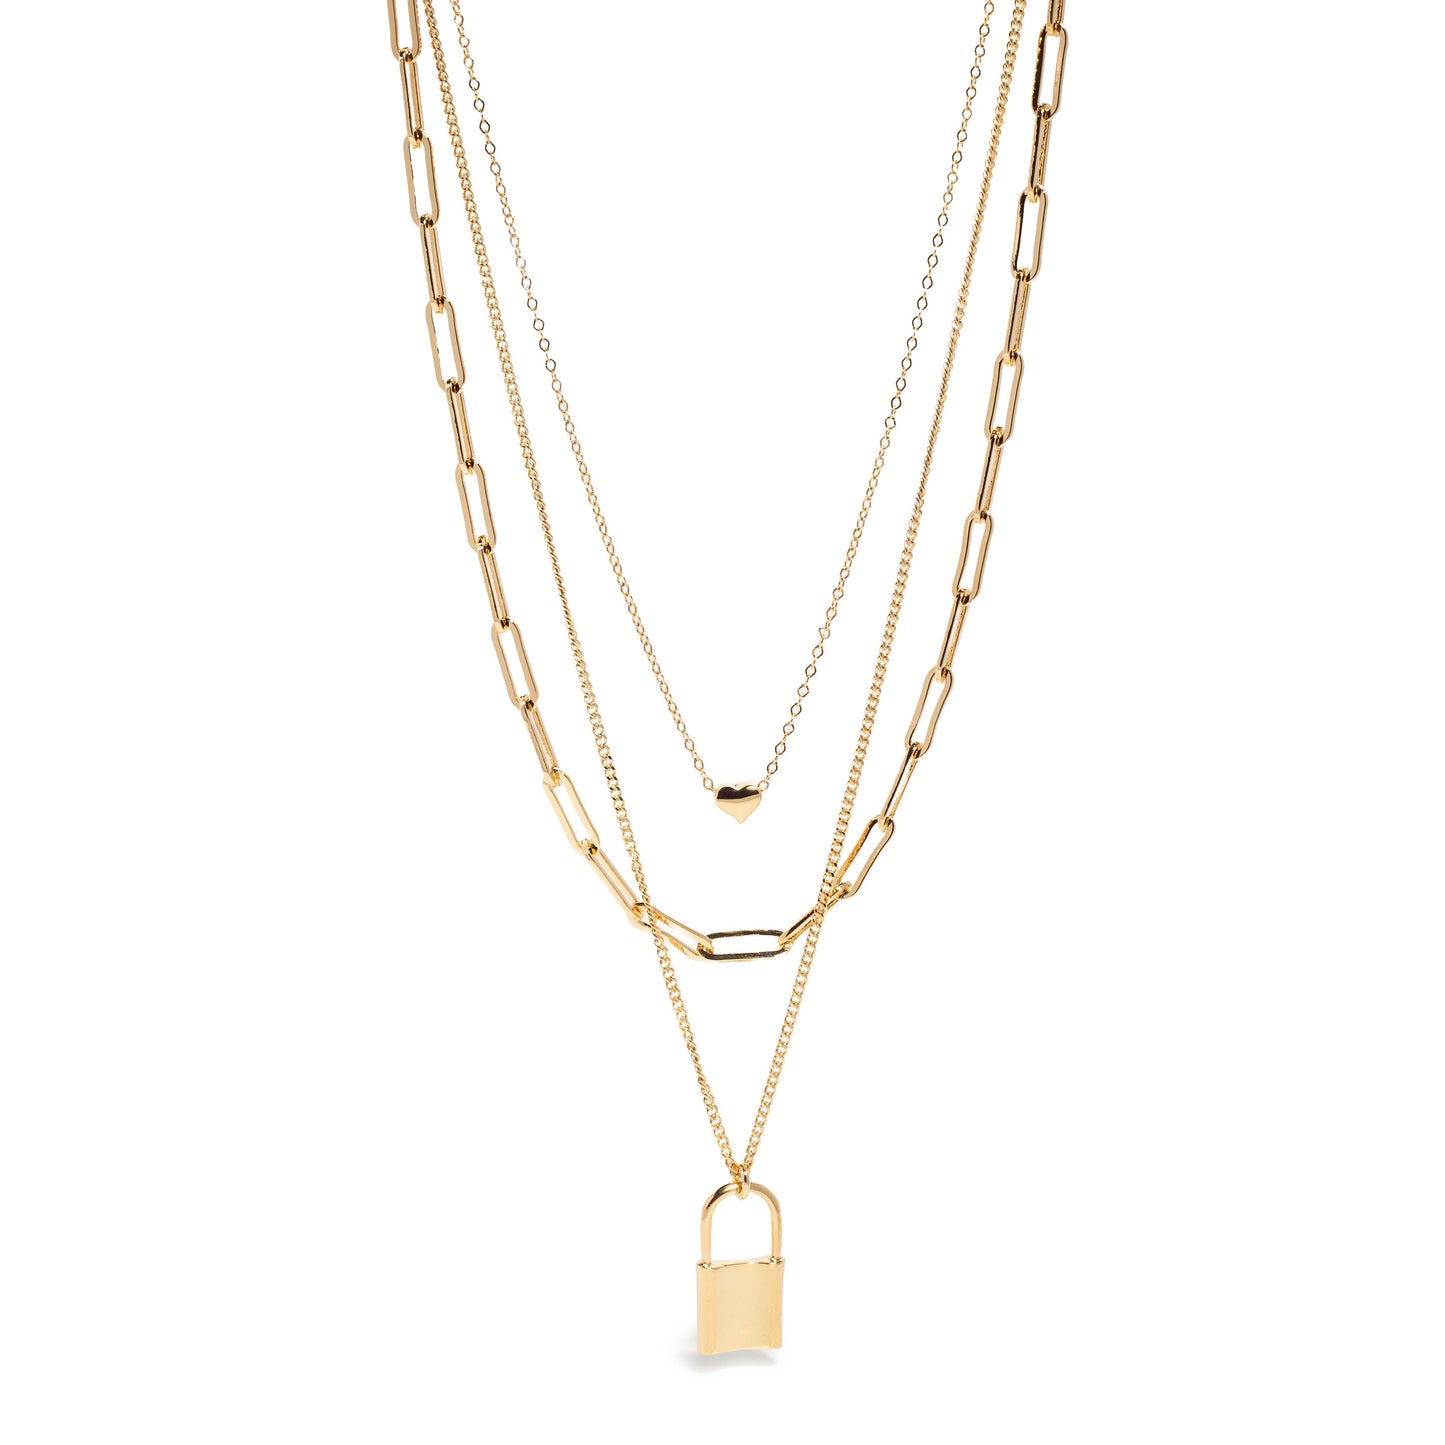 Yellow gold Layered Three Chains with Lock Pendant + Extender